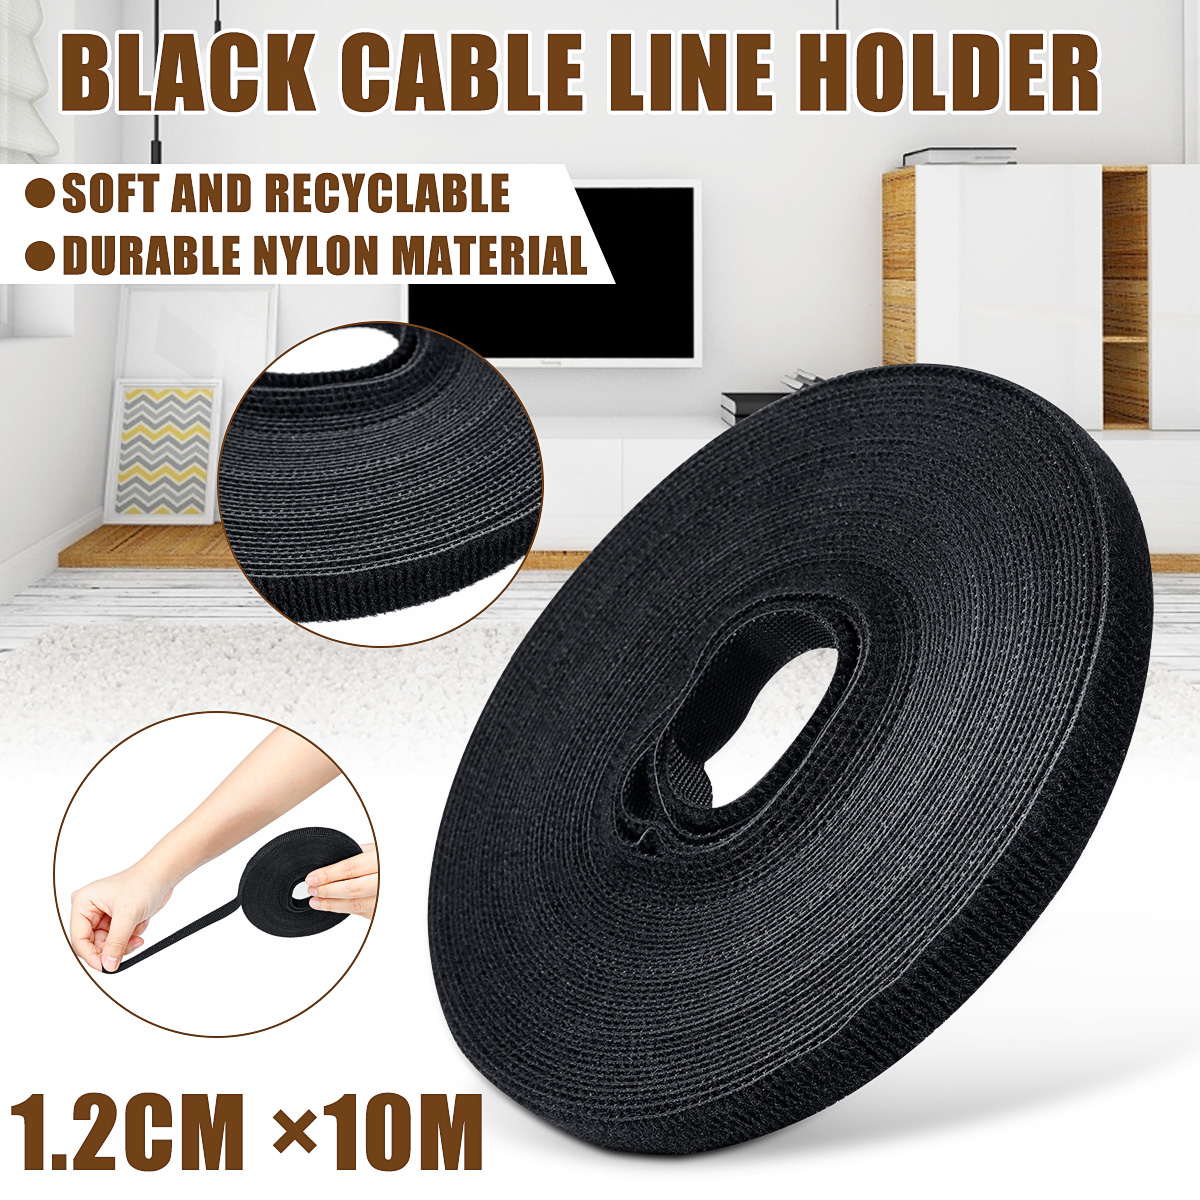 10m-Nylon-Cable-Ties-Wrap-Ties-Fastening-Cables-Wire-Cable-Line-Holder-Winder-Clip-1558531-1